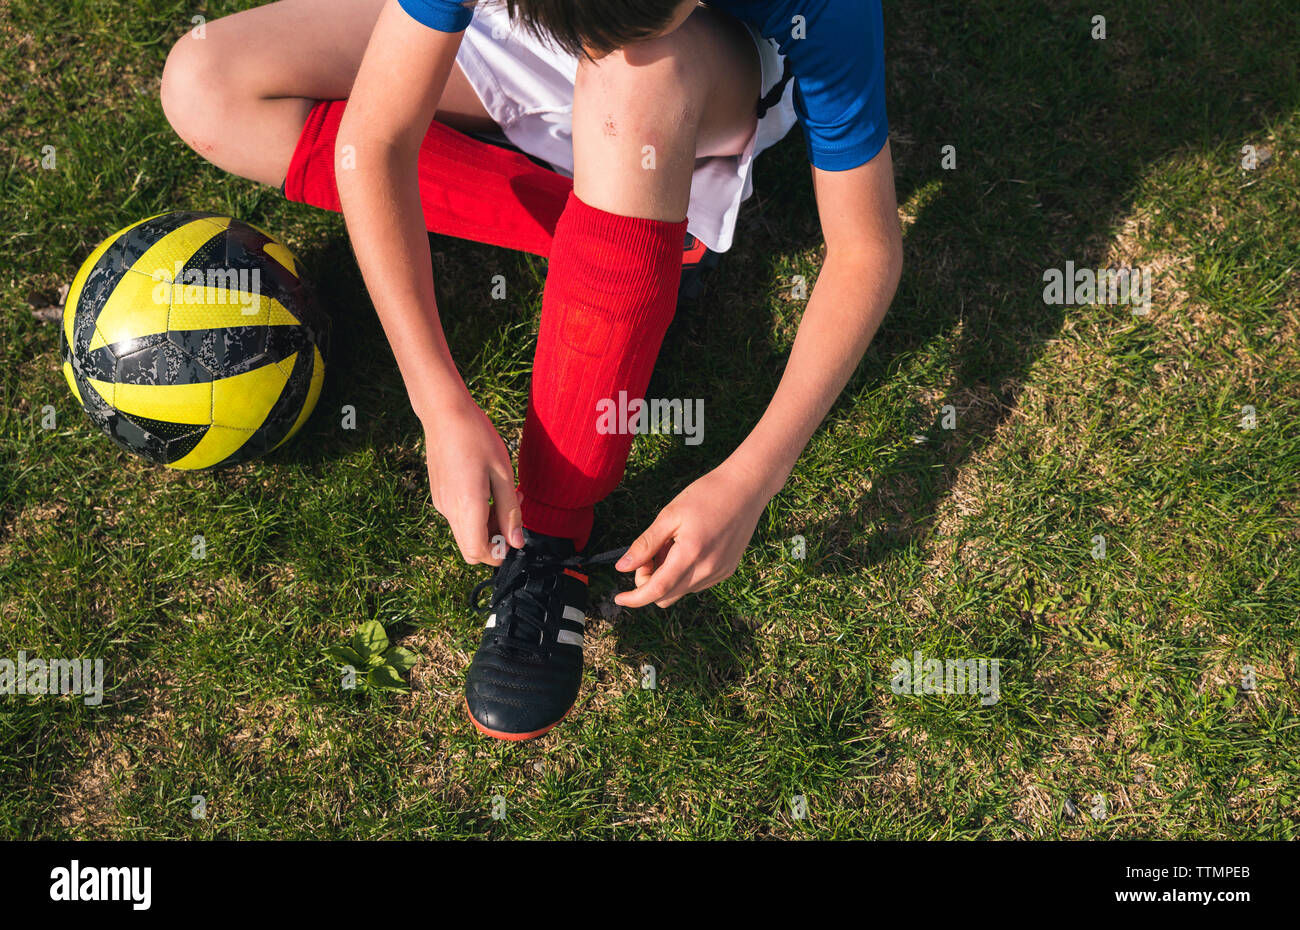 High angle view of boy tying shoelace while sitting by soccer ball on grassy field Stock Photo